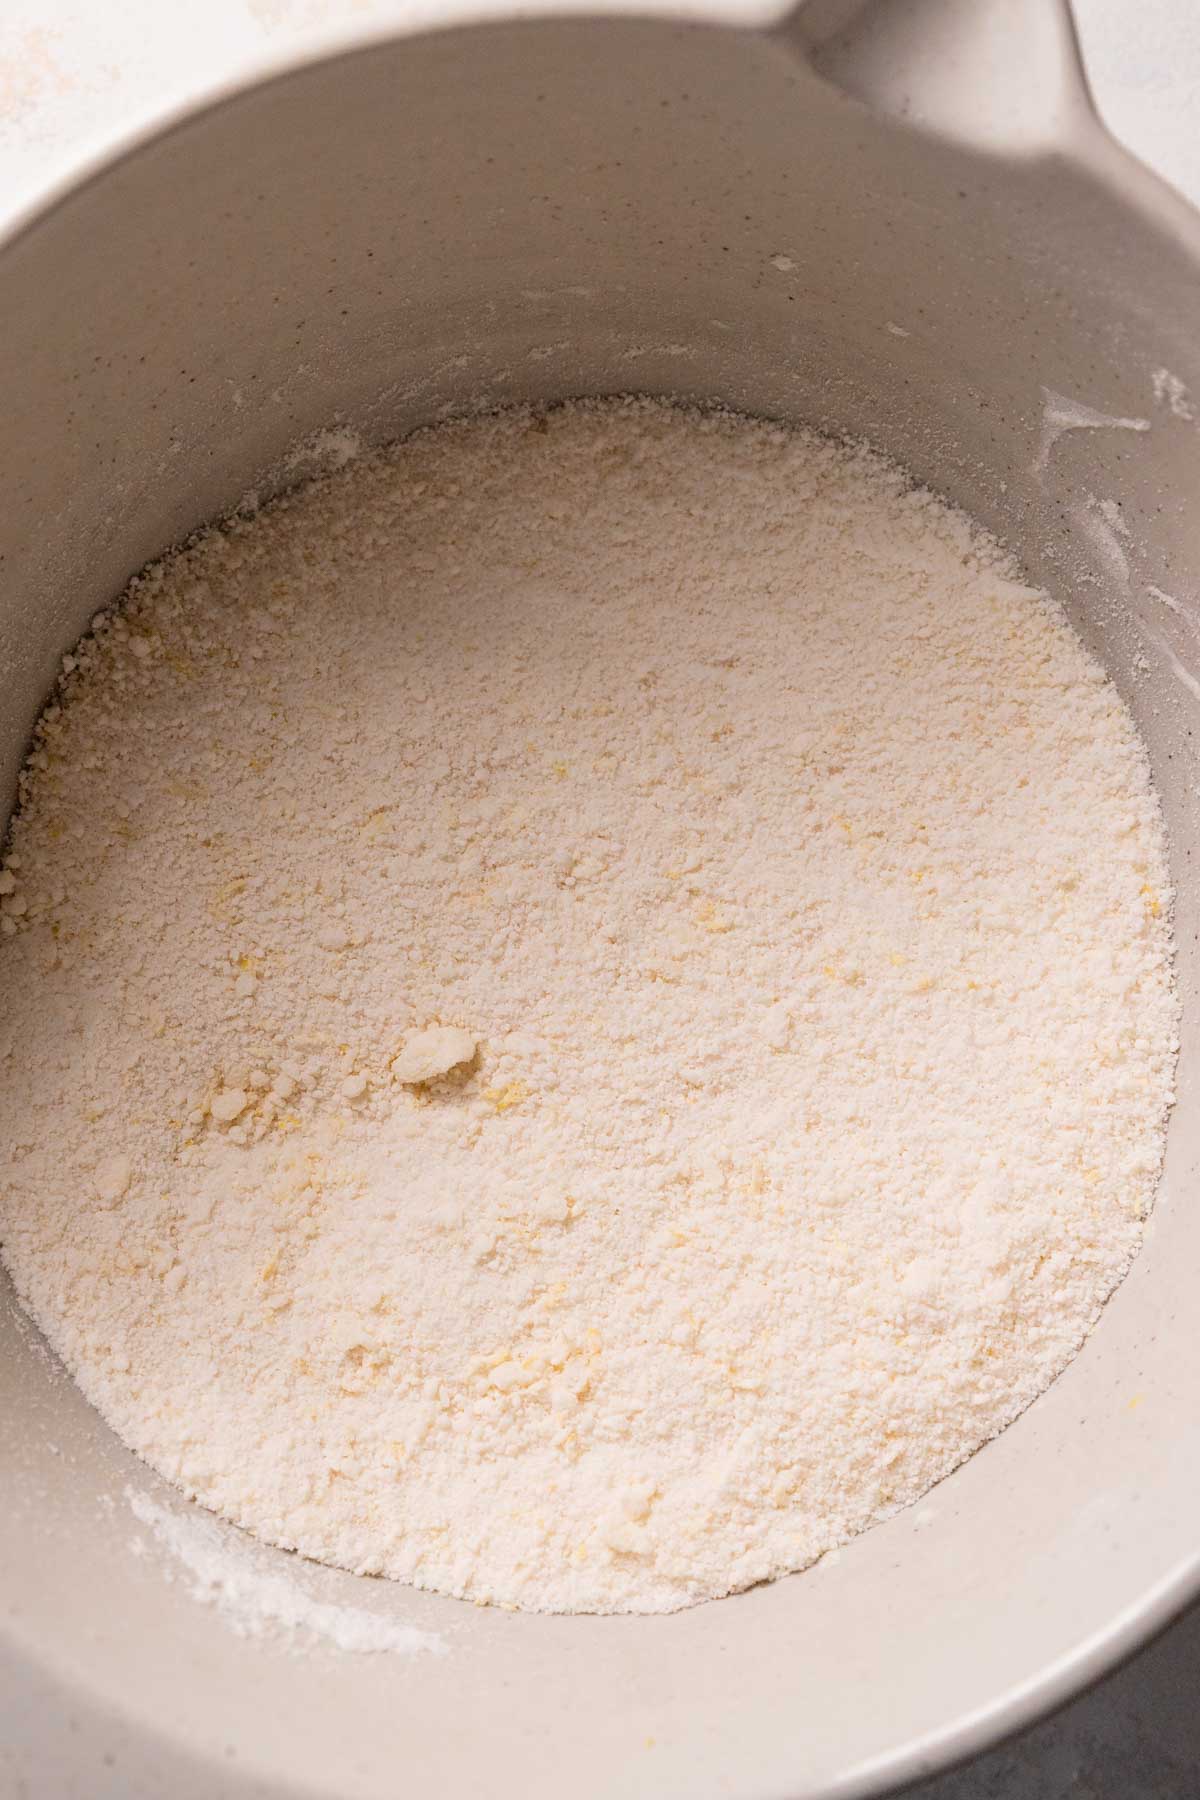 dry ingredients and butter mixed together in a mixing bowl.